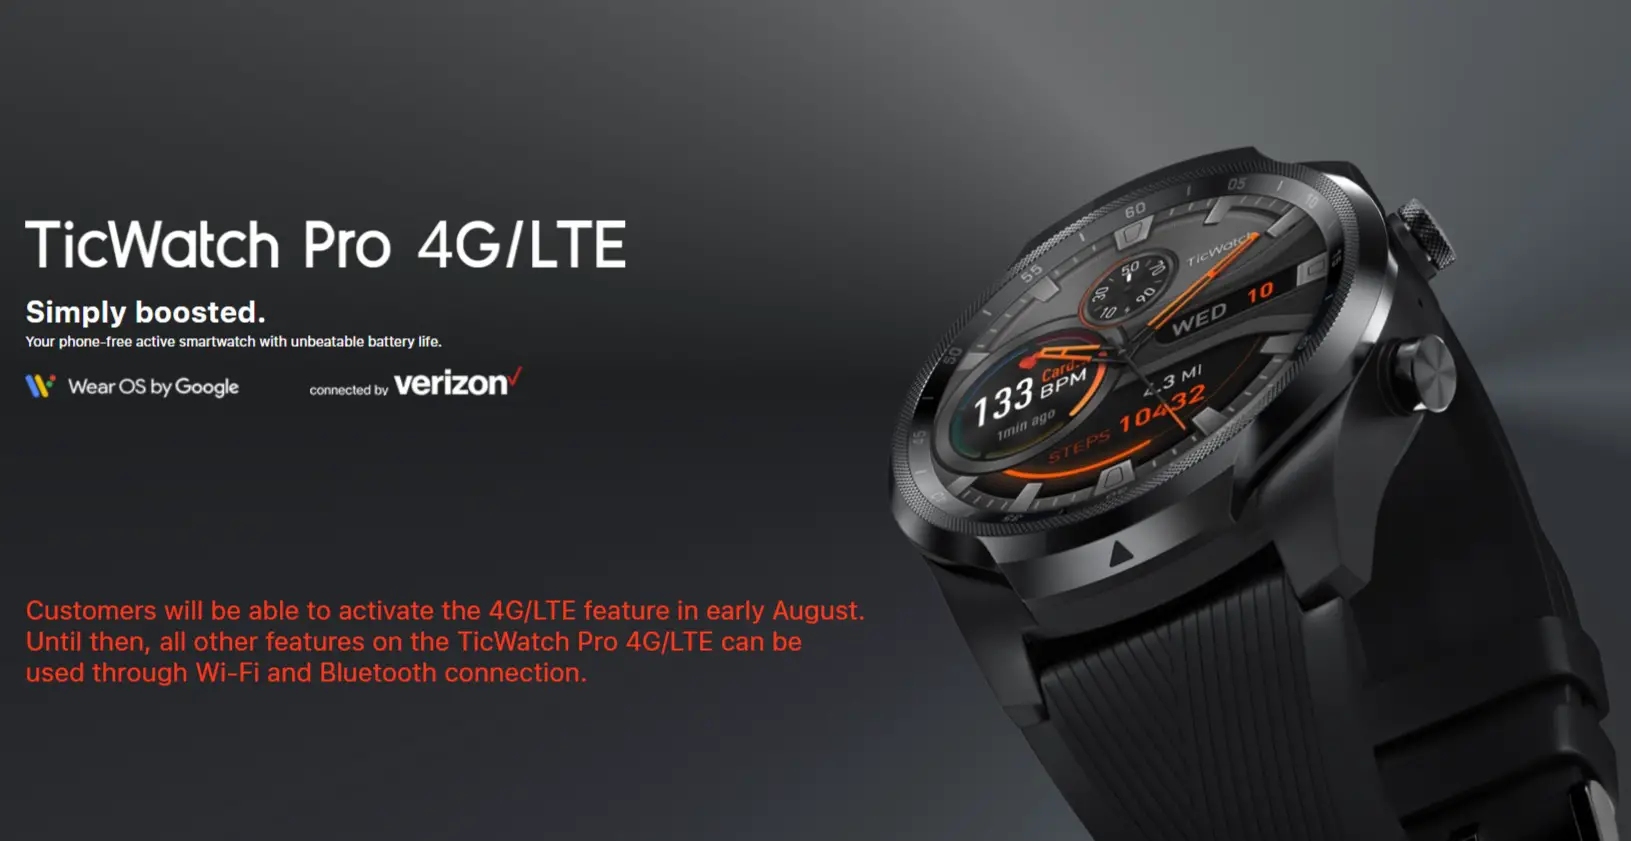 Ticwatch Pro 4G/LTE is official